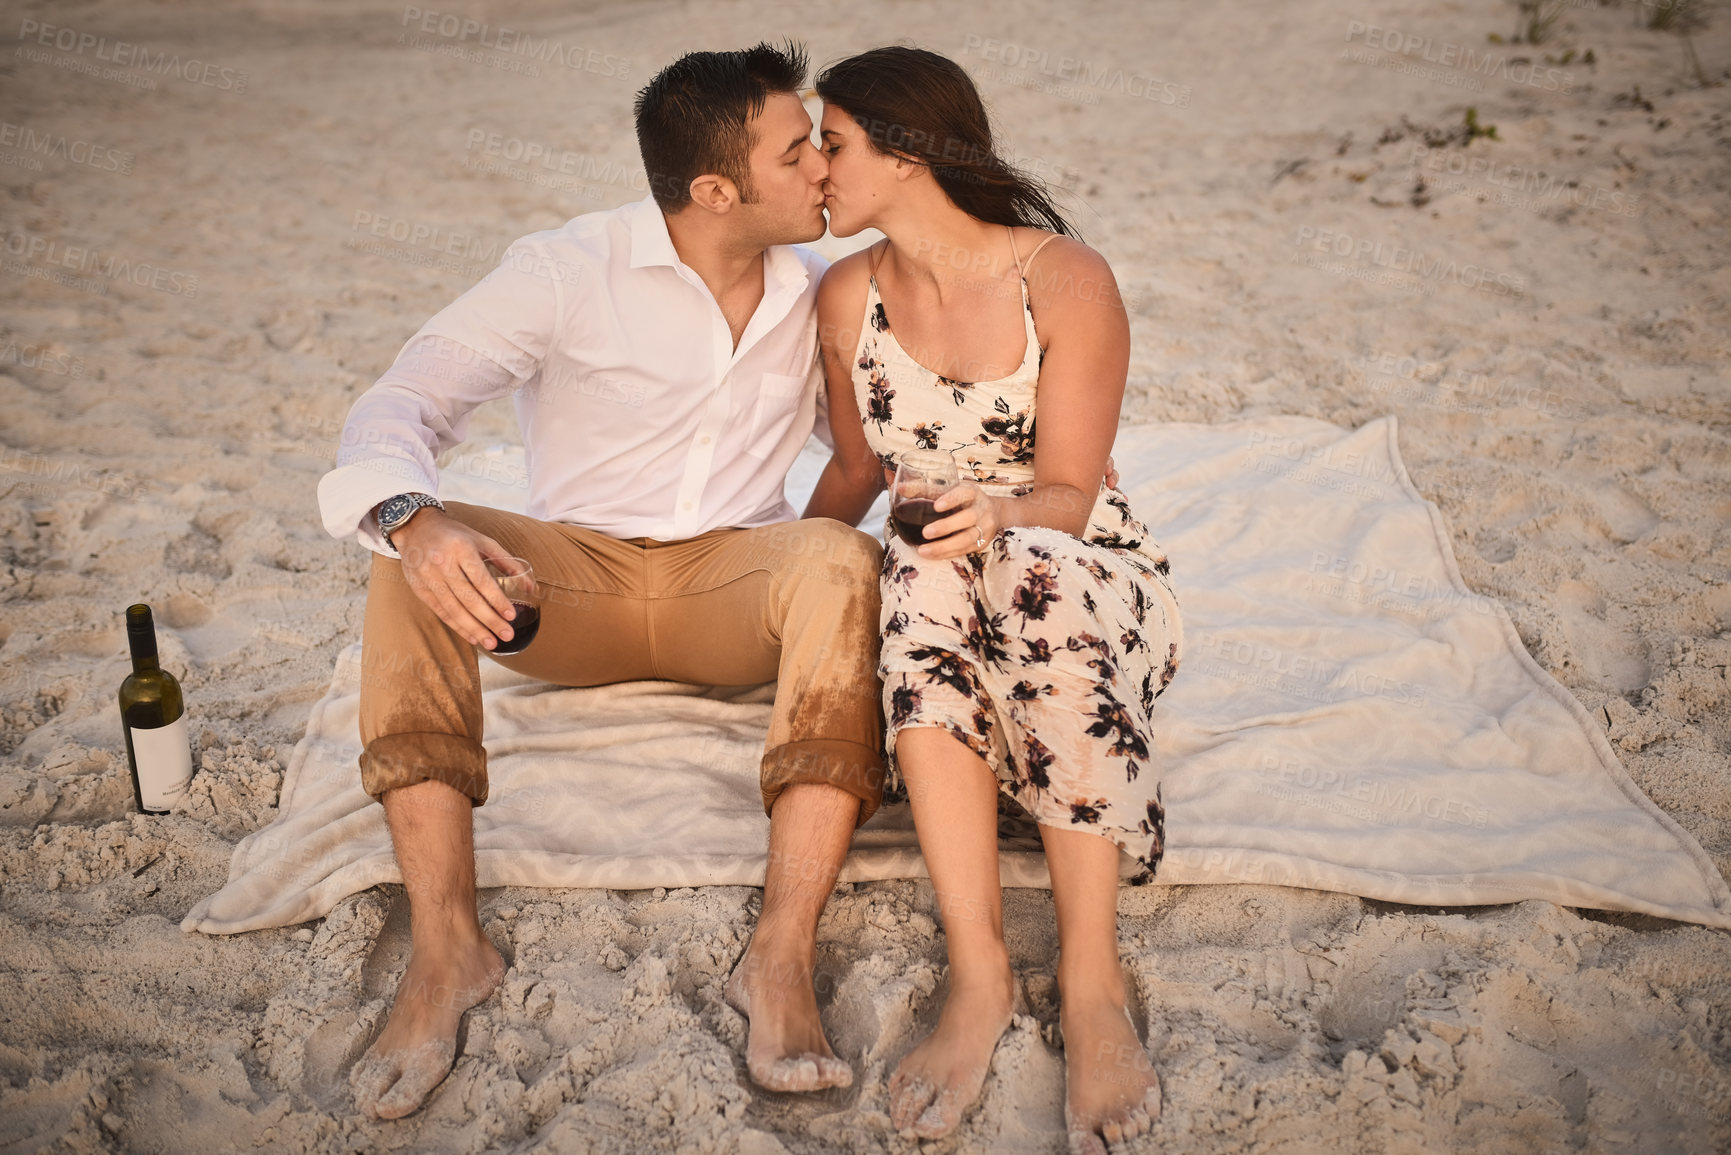 Buy stock photo High angle shot of an affectionate young couple kissing while sitting on the beach